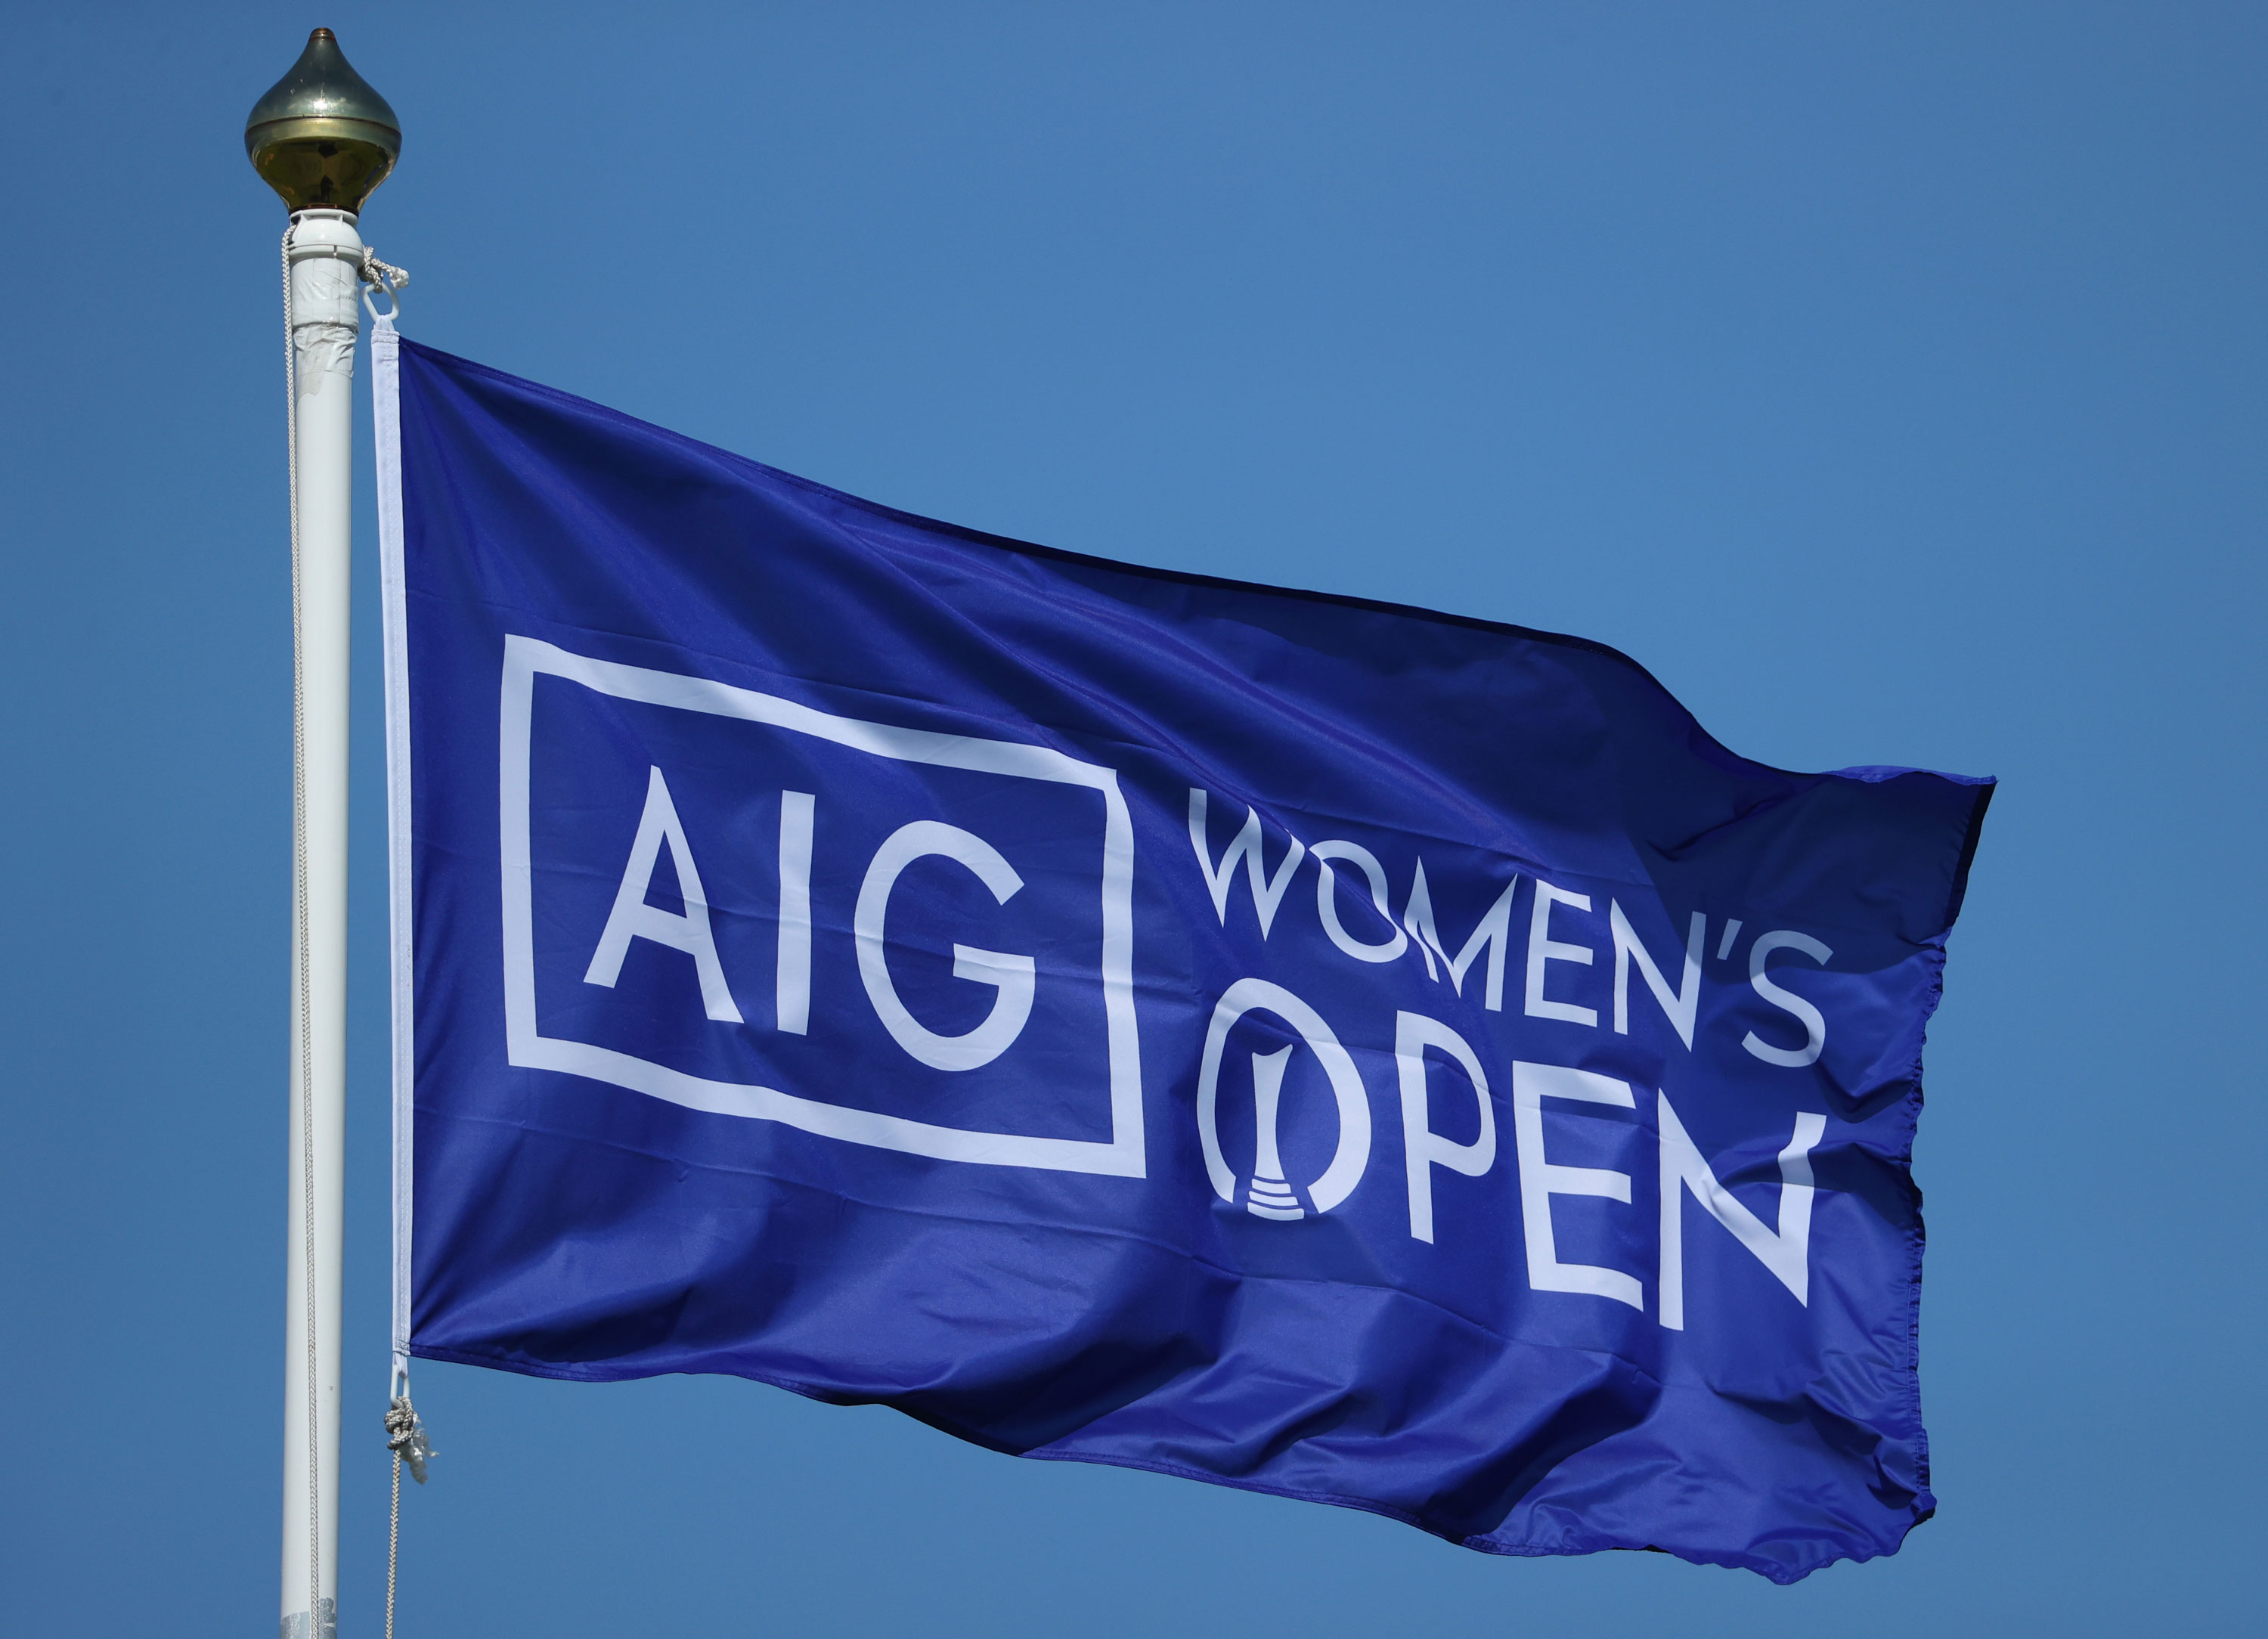 Here S The Prize Money Payout For Each Golfer At The 2021 Aig Women S Open Golf News And Tour Information Golf Digest